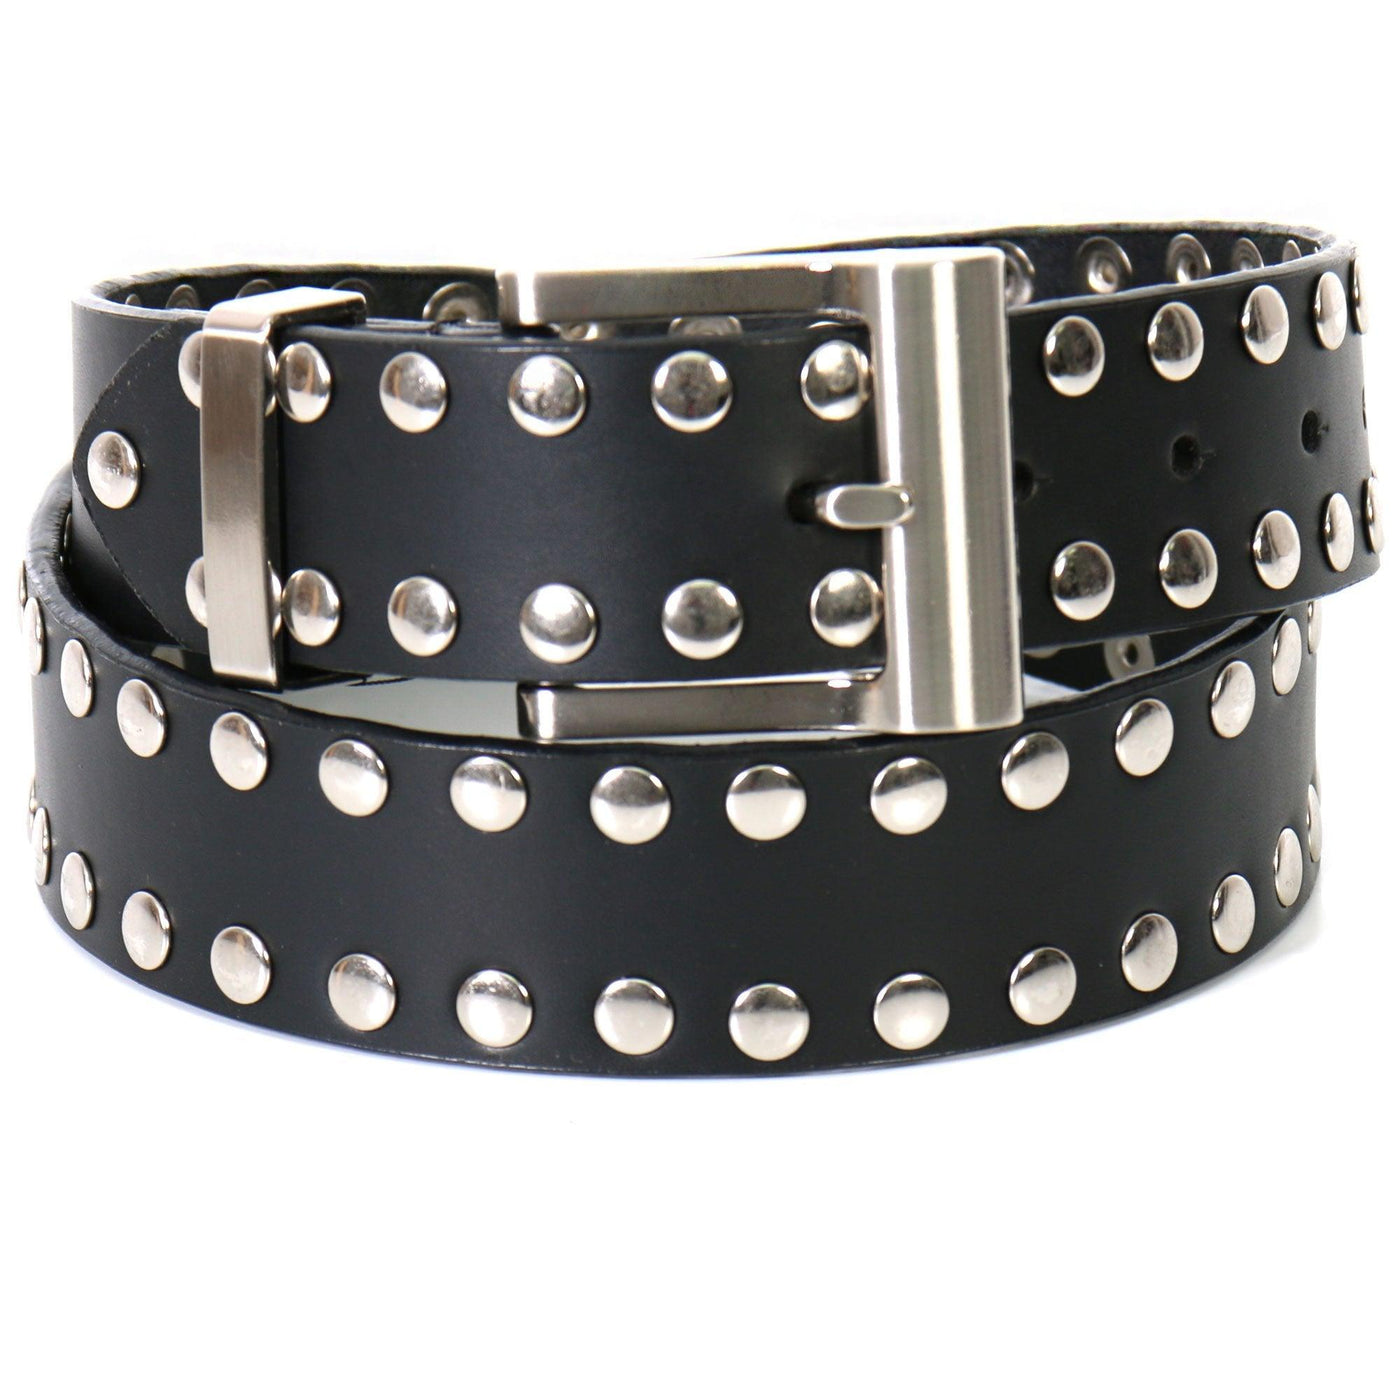 Hot Leathers Leather Belt With Studs - American Legend Rider